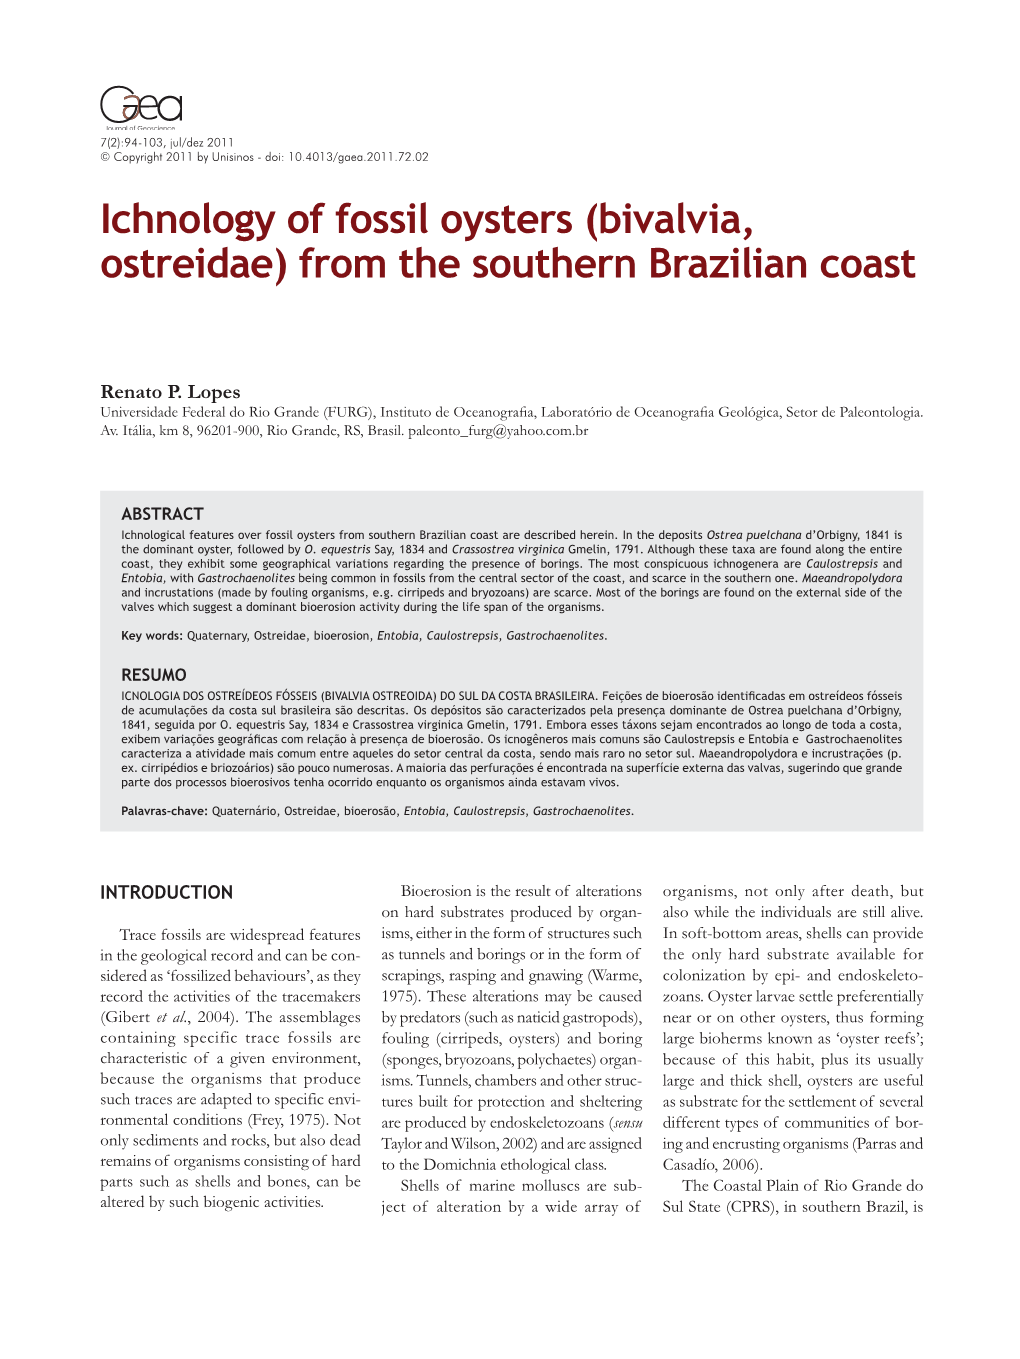 Ichnology of Fossil Oysters (Bivalvia, Ostreidae) from the Southern Brazilian Coast